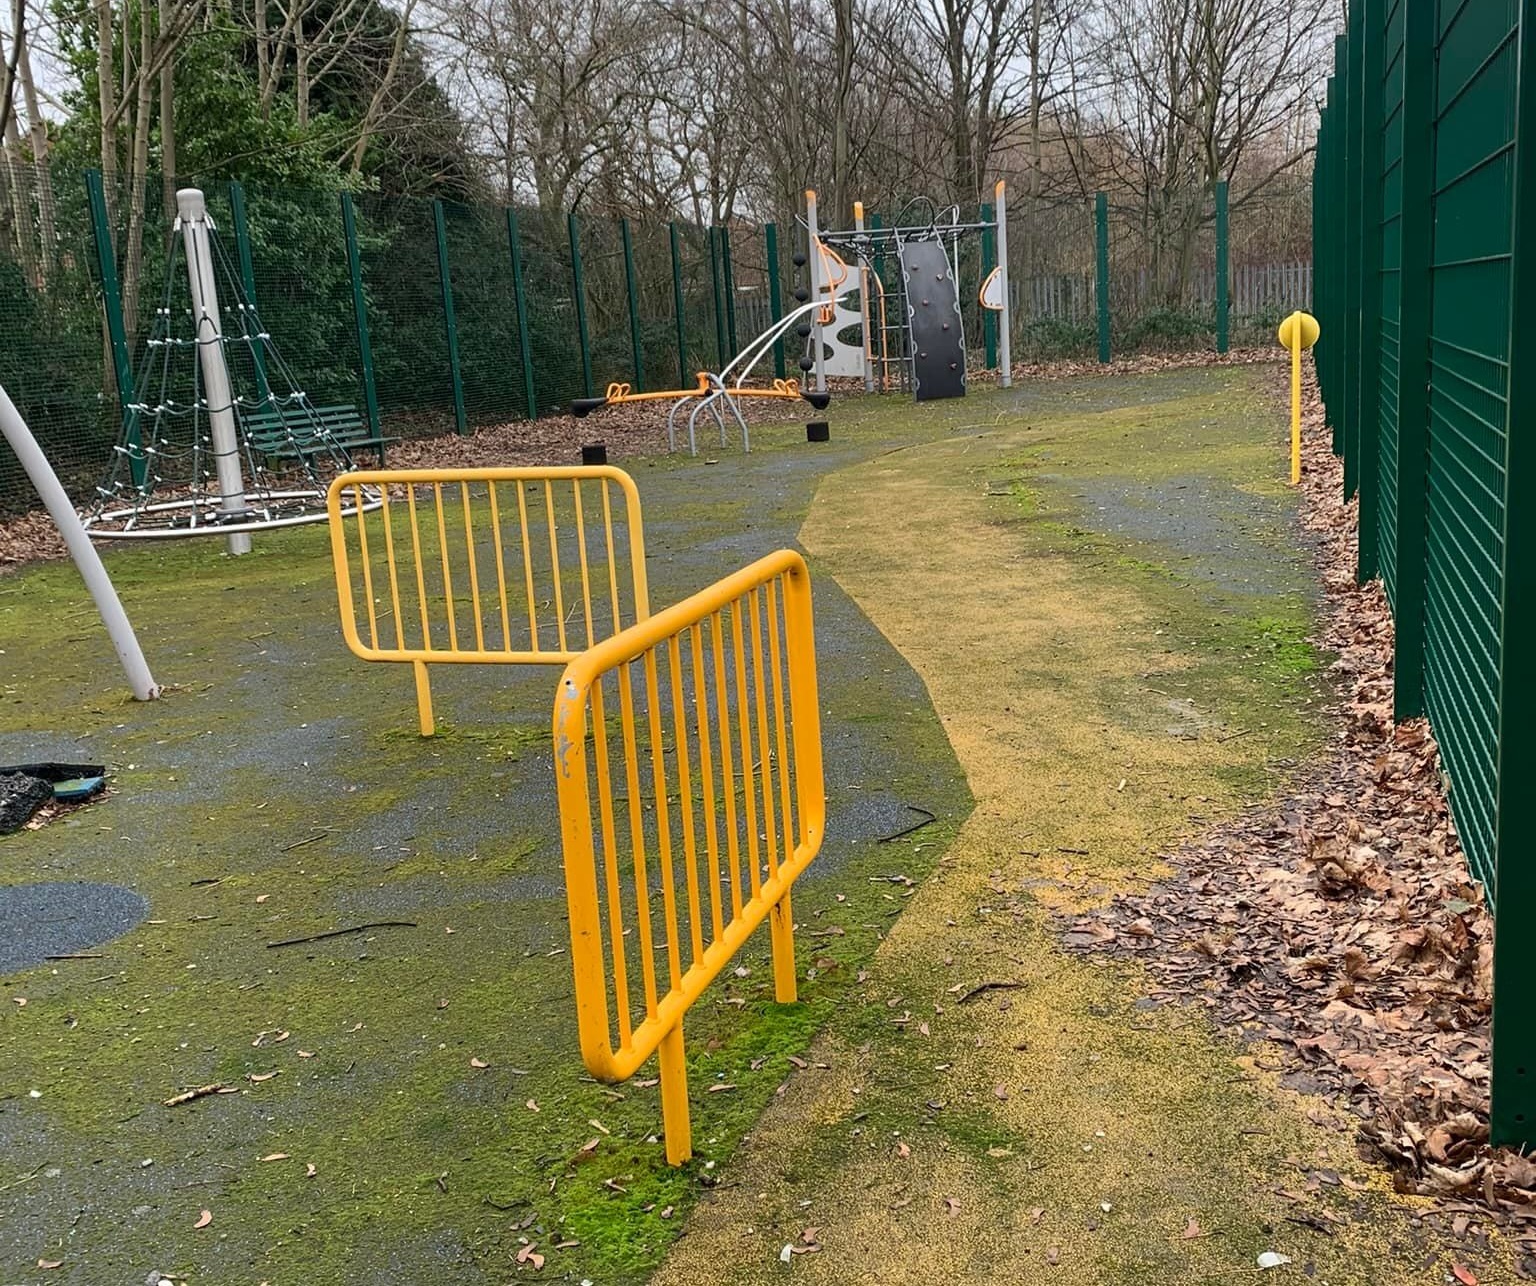 The play area has become run-down due to vandalism